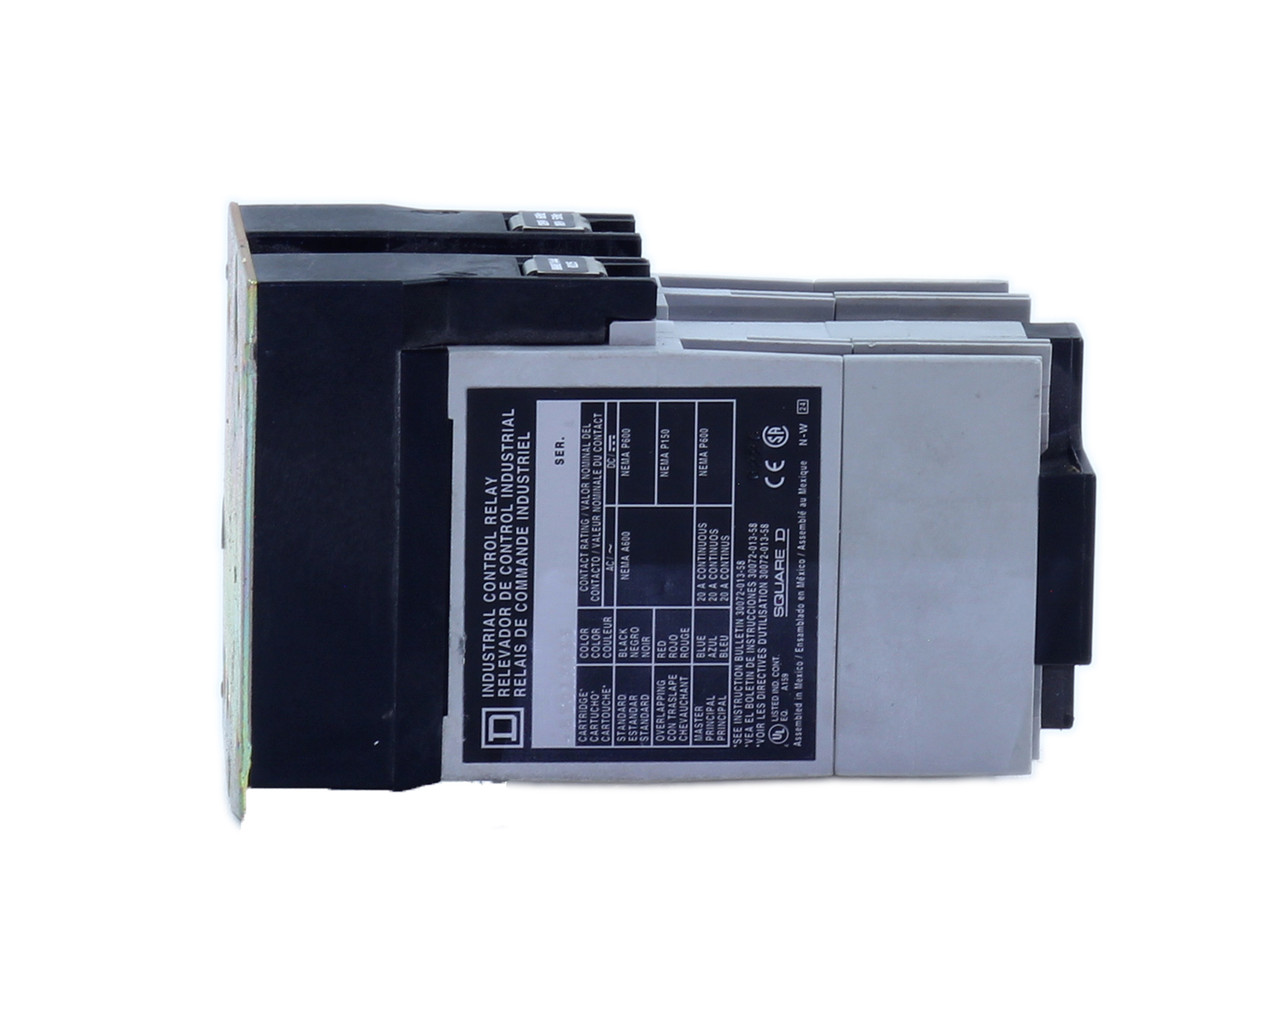 Square D 8501X033 Industrial Control Relay 110-120V 50/60Hz Series A